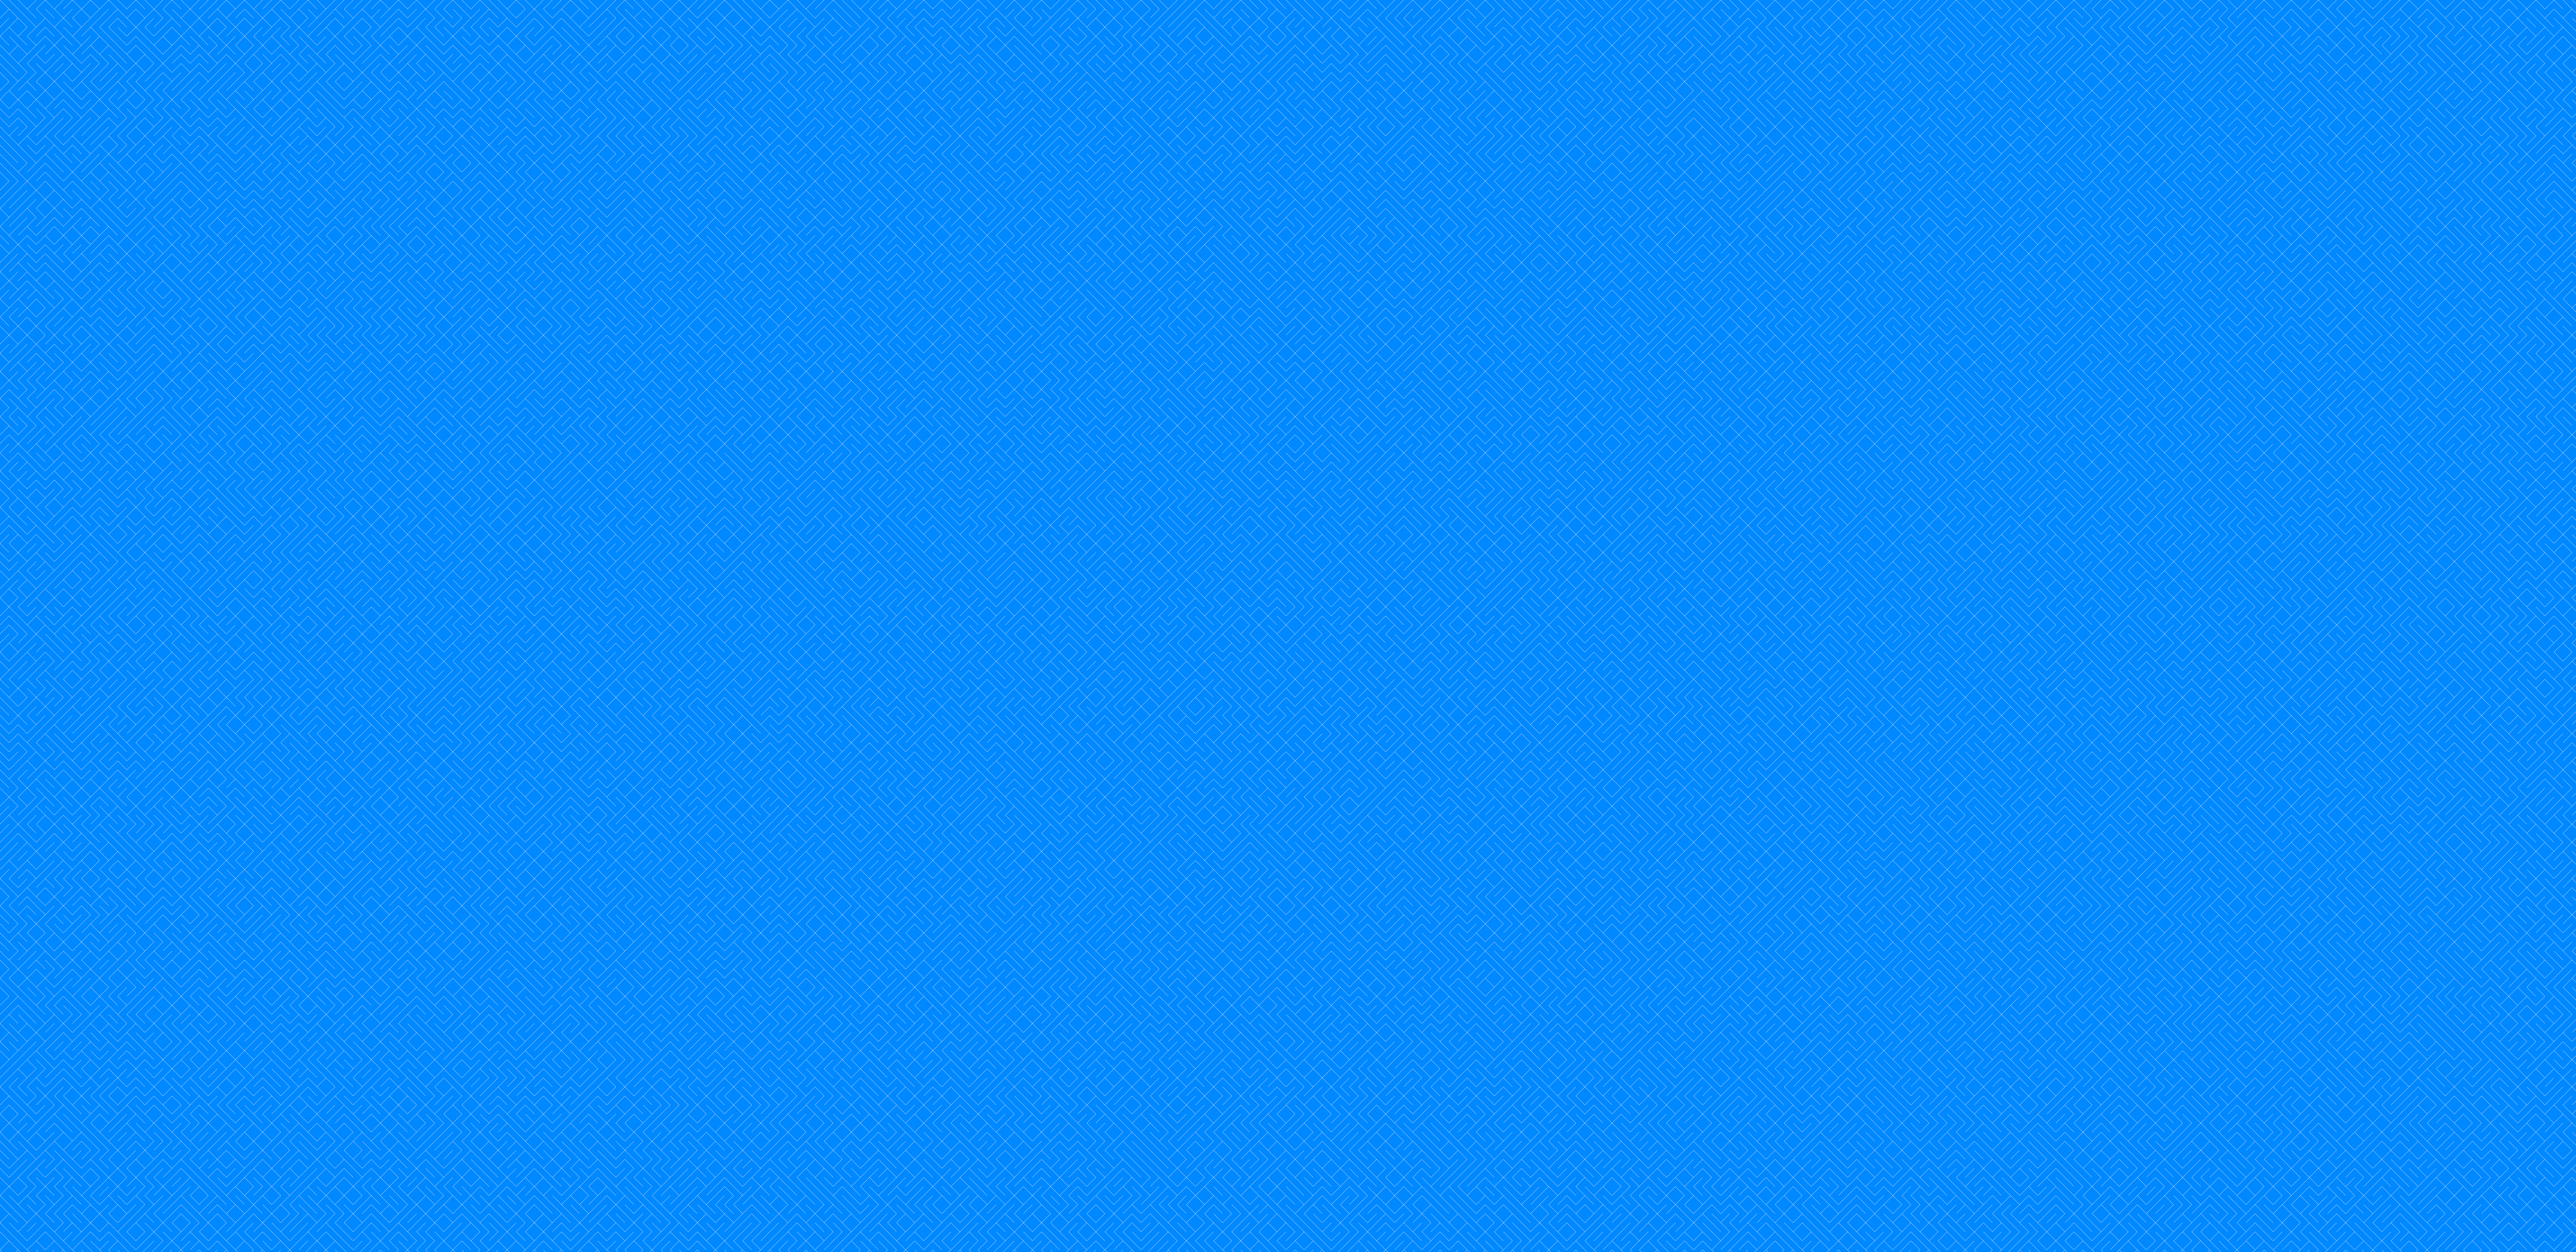 Abstract Blue Simple Minimalism Commodore 64 Texture 8533x4147